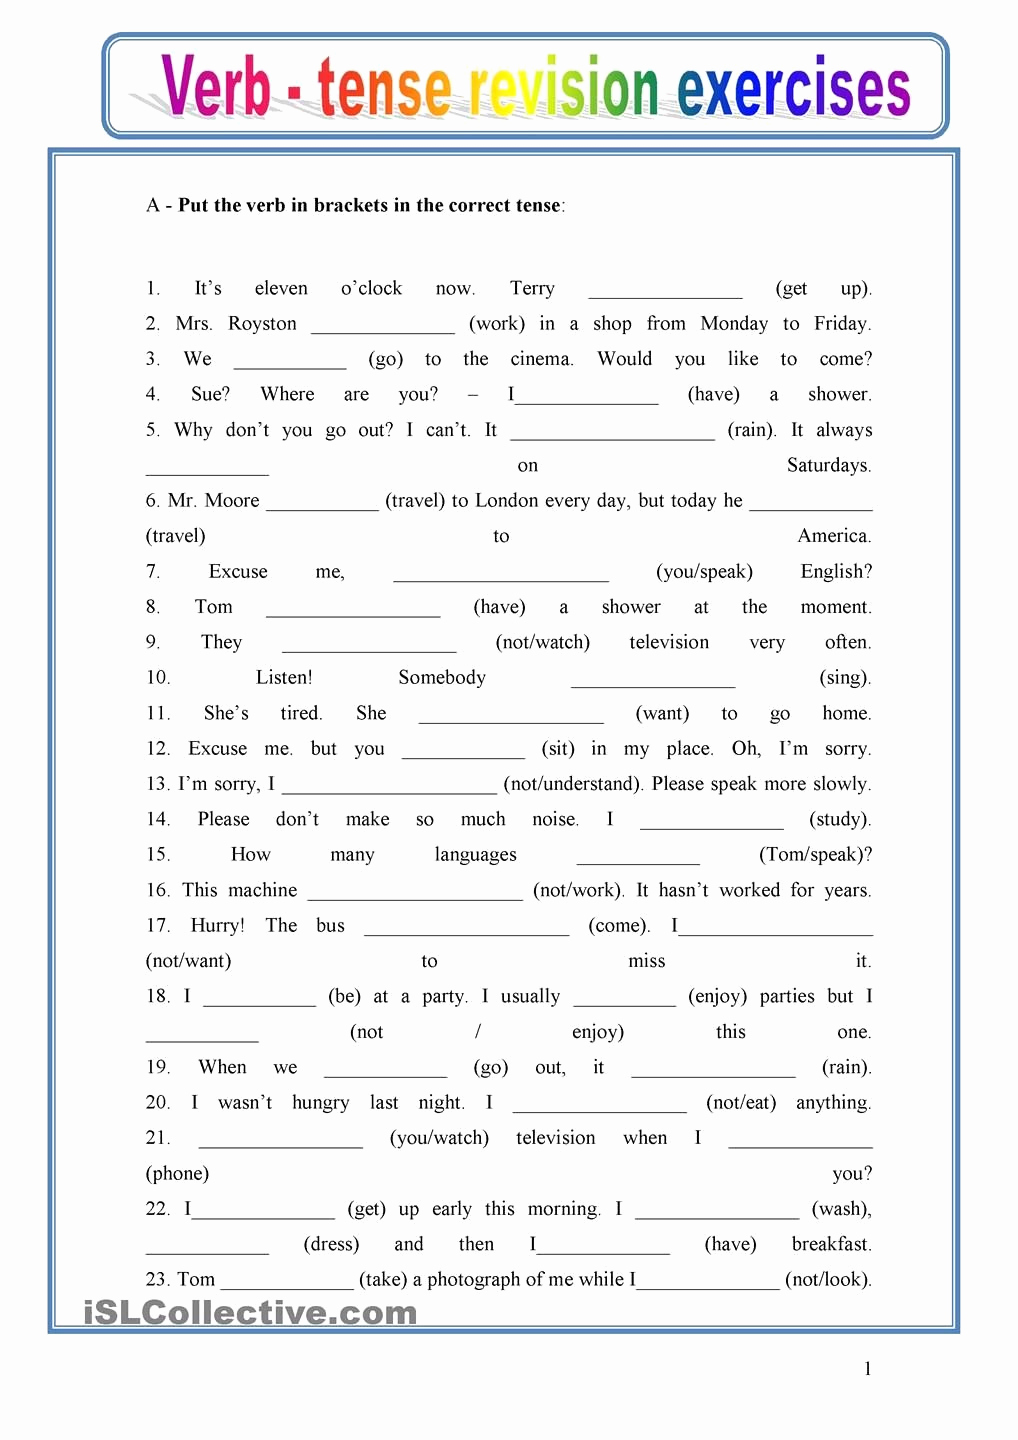 Verbs Worksheets for Middle School Unique 20 Verb Tense Worksheets Middle School Printable